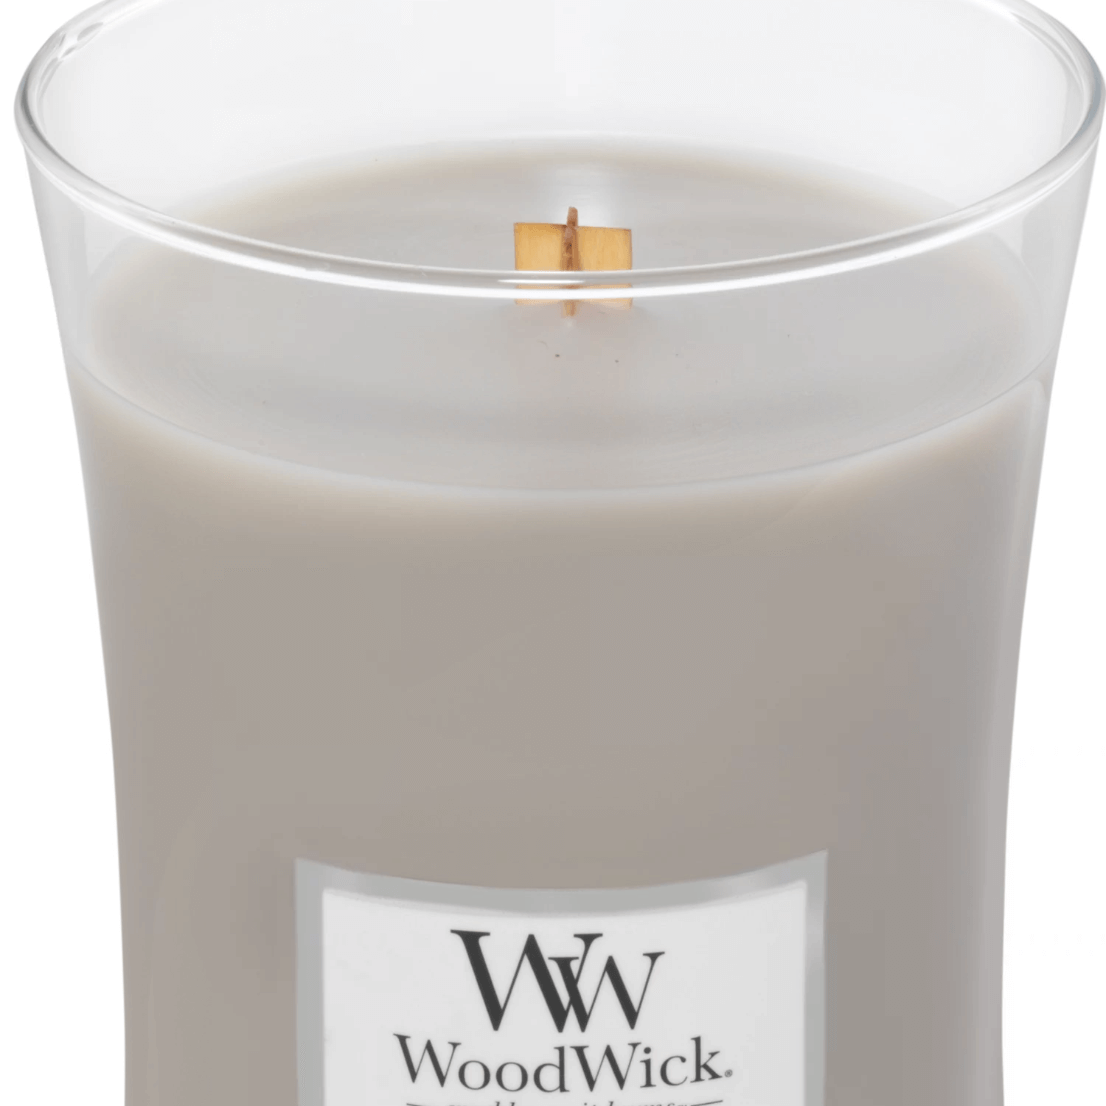 Woodwick Fireside Large Hourglass Candle